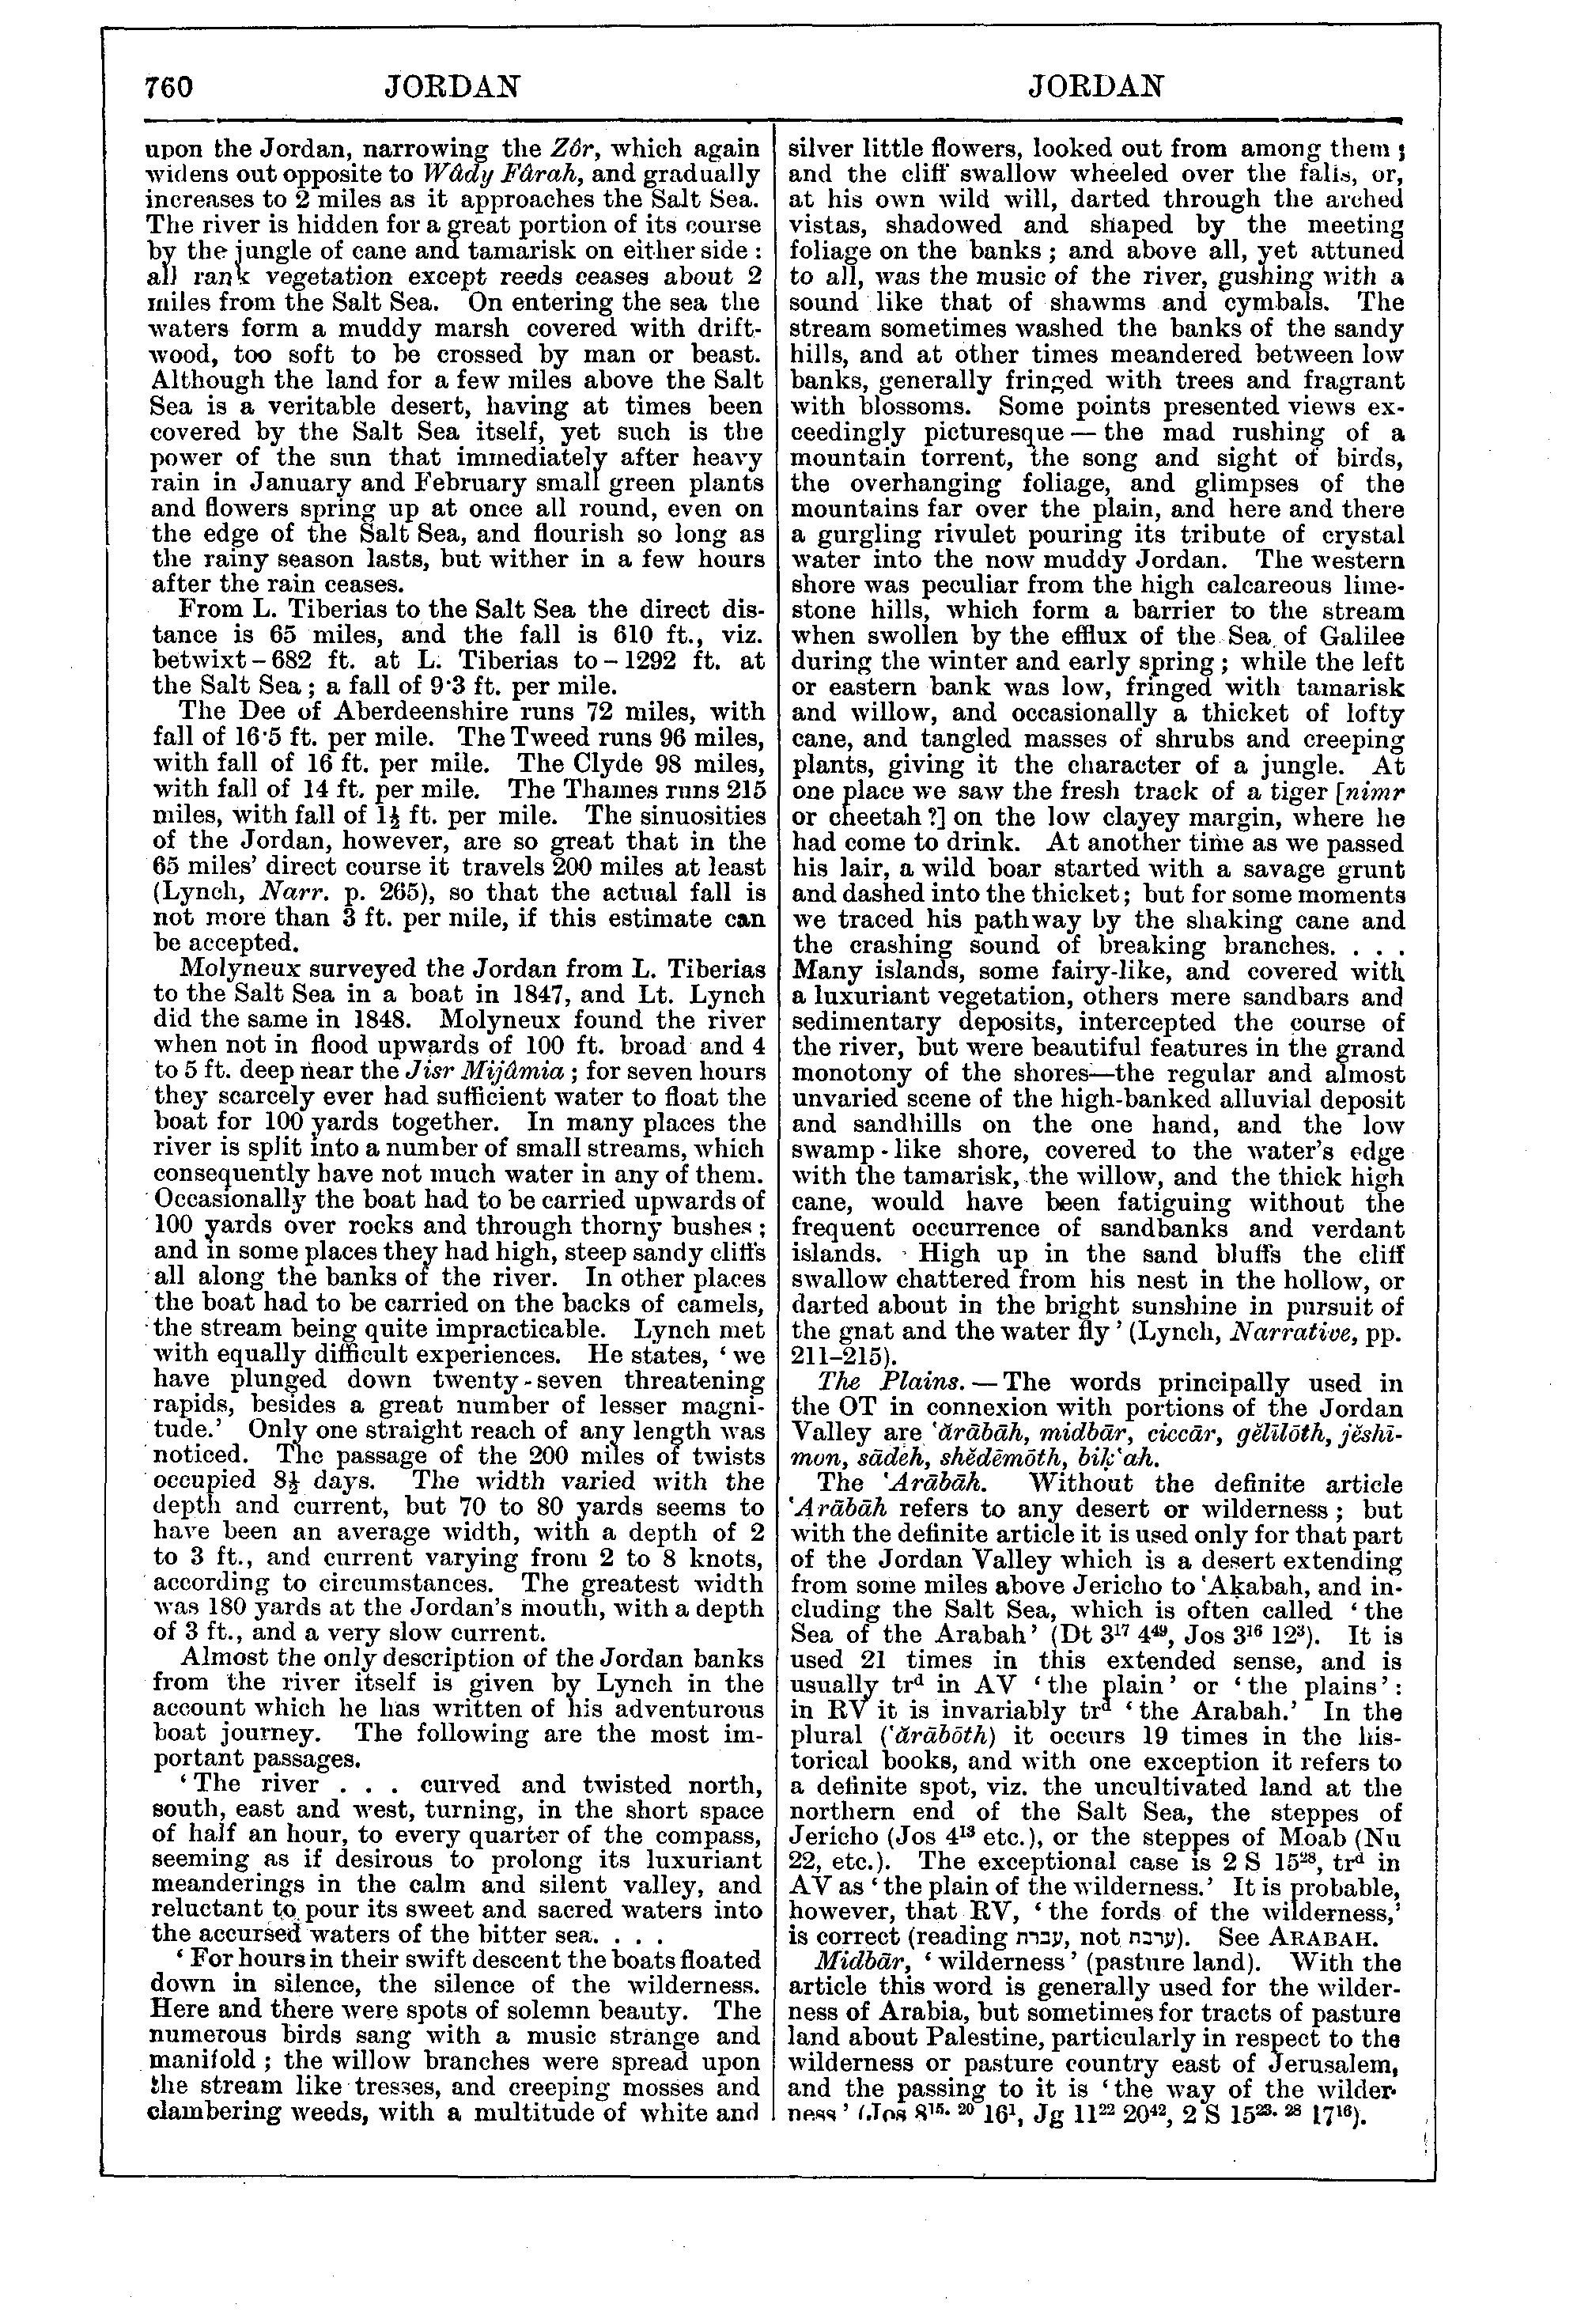 Image of page 760